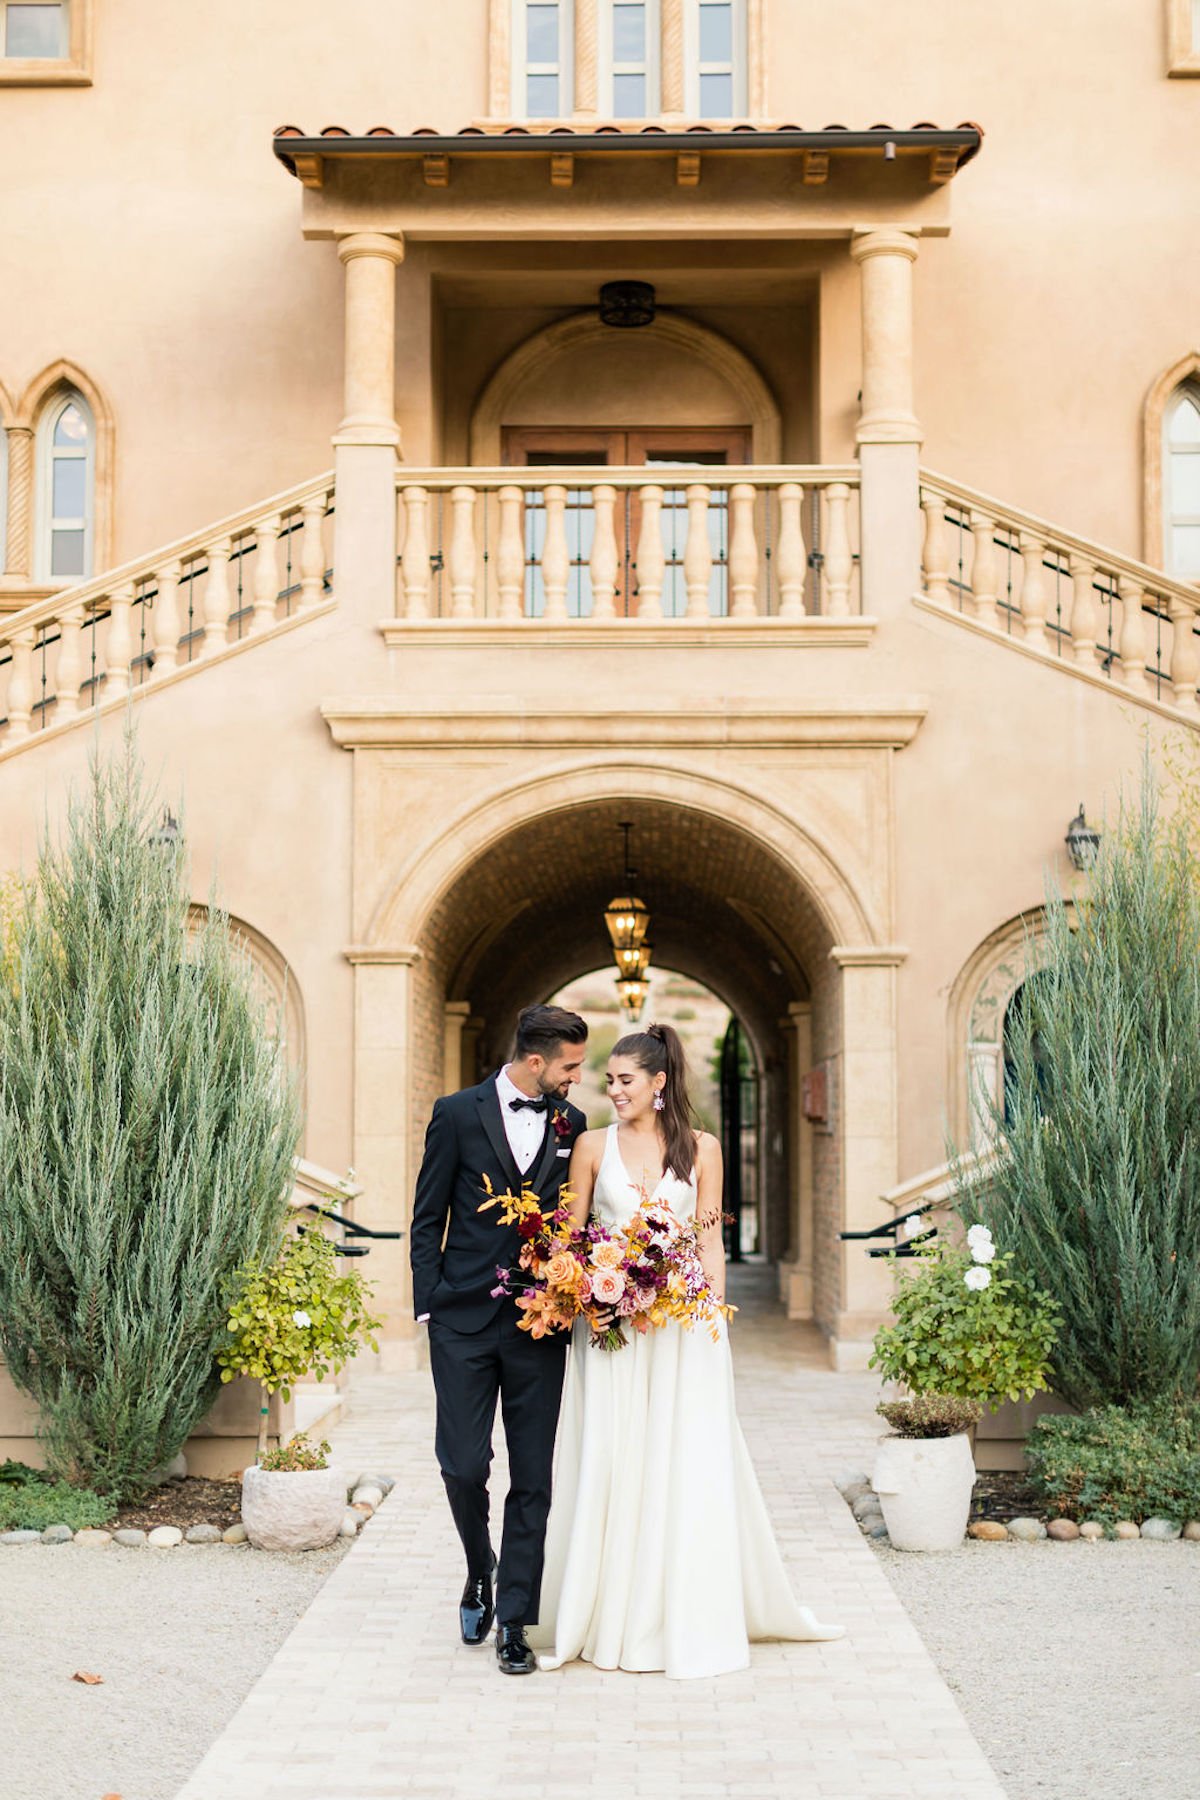 An Italian-Inspired Micro Wedding to Inspire Spring Brides Transitioning to Fall